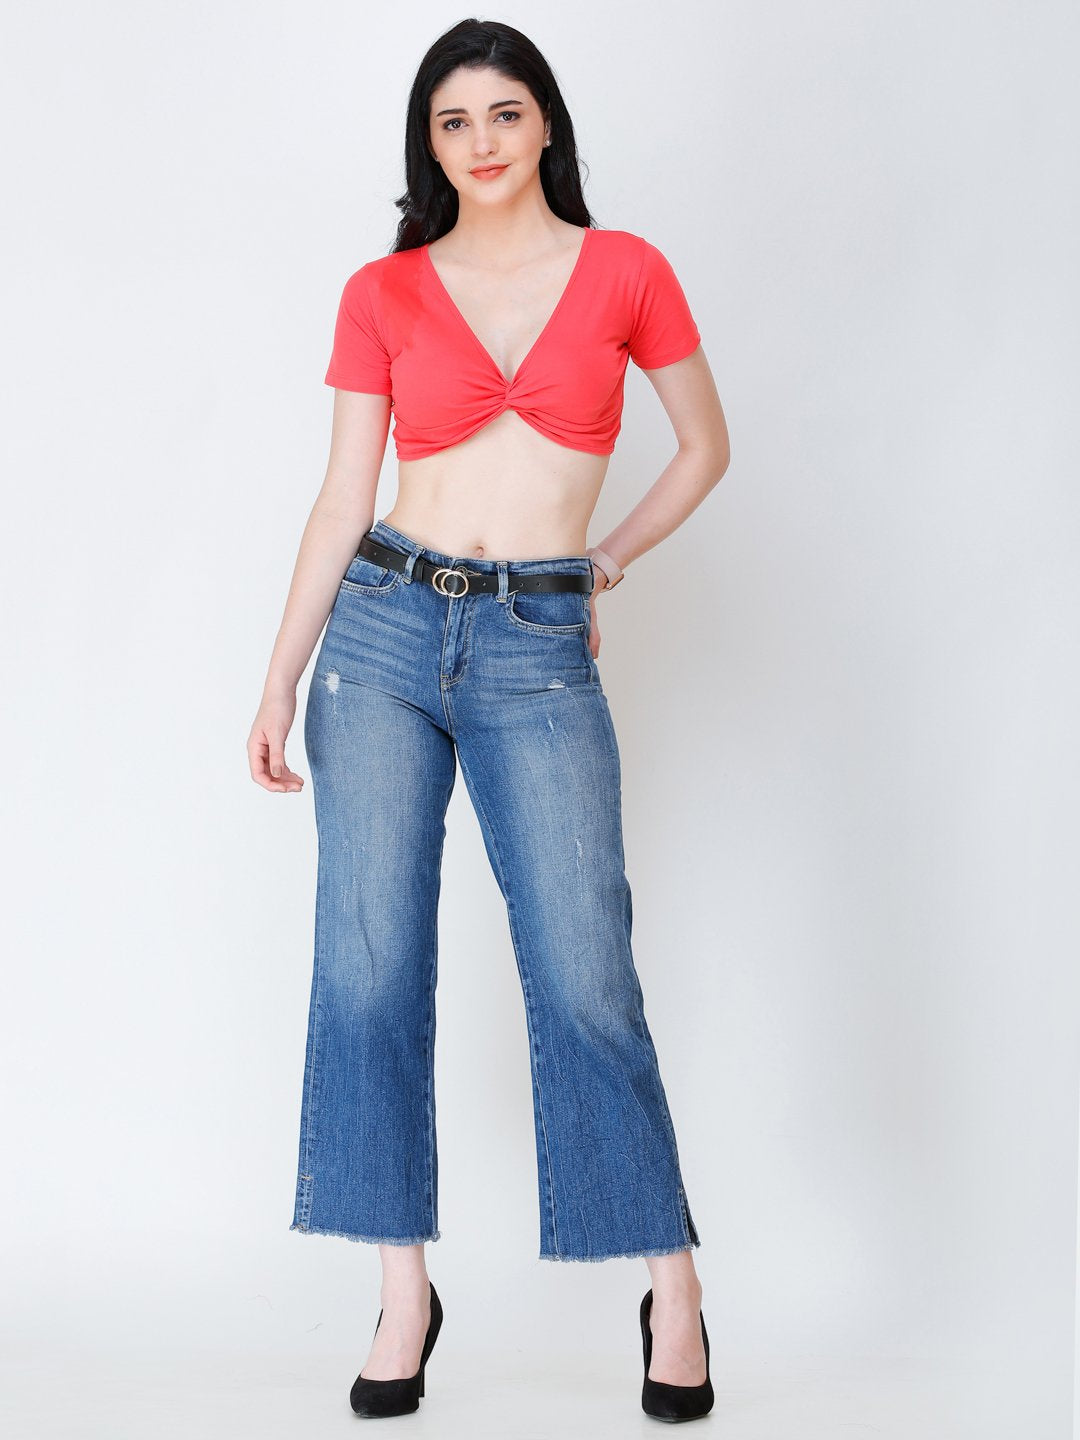 SCORPIUS coral knotted crop top